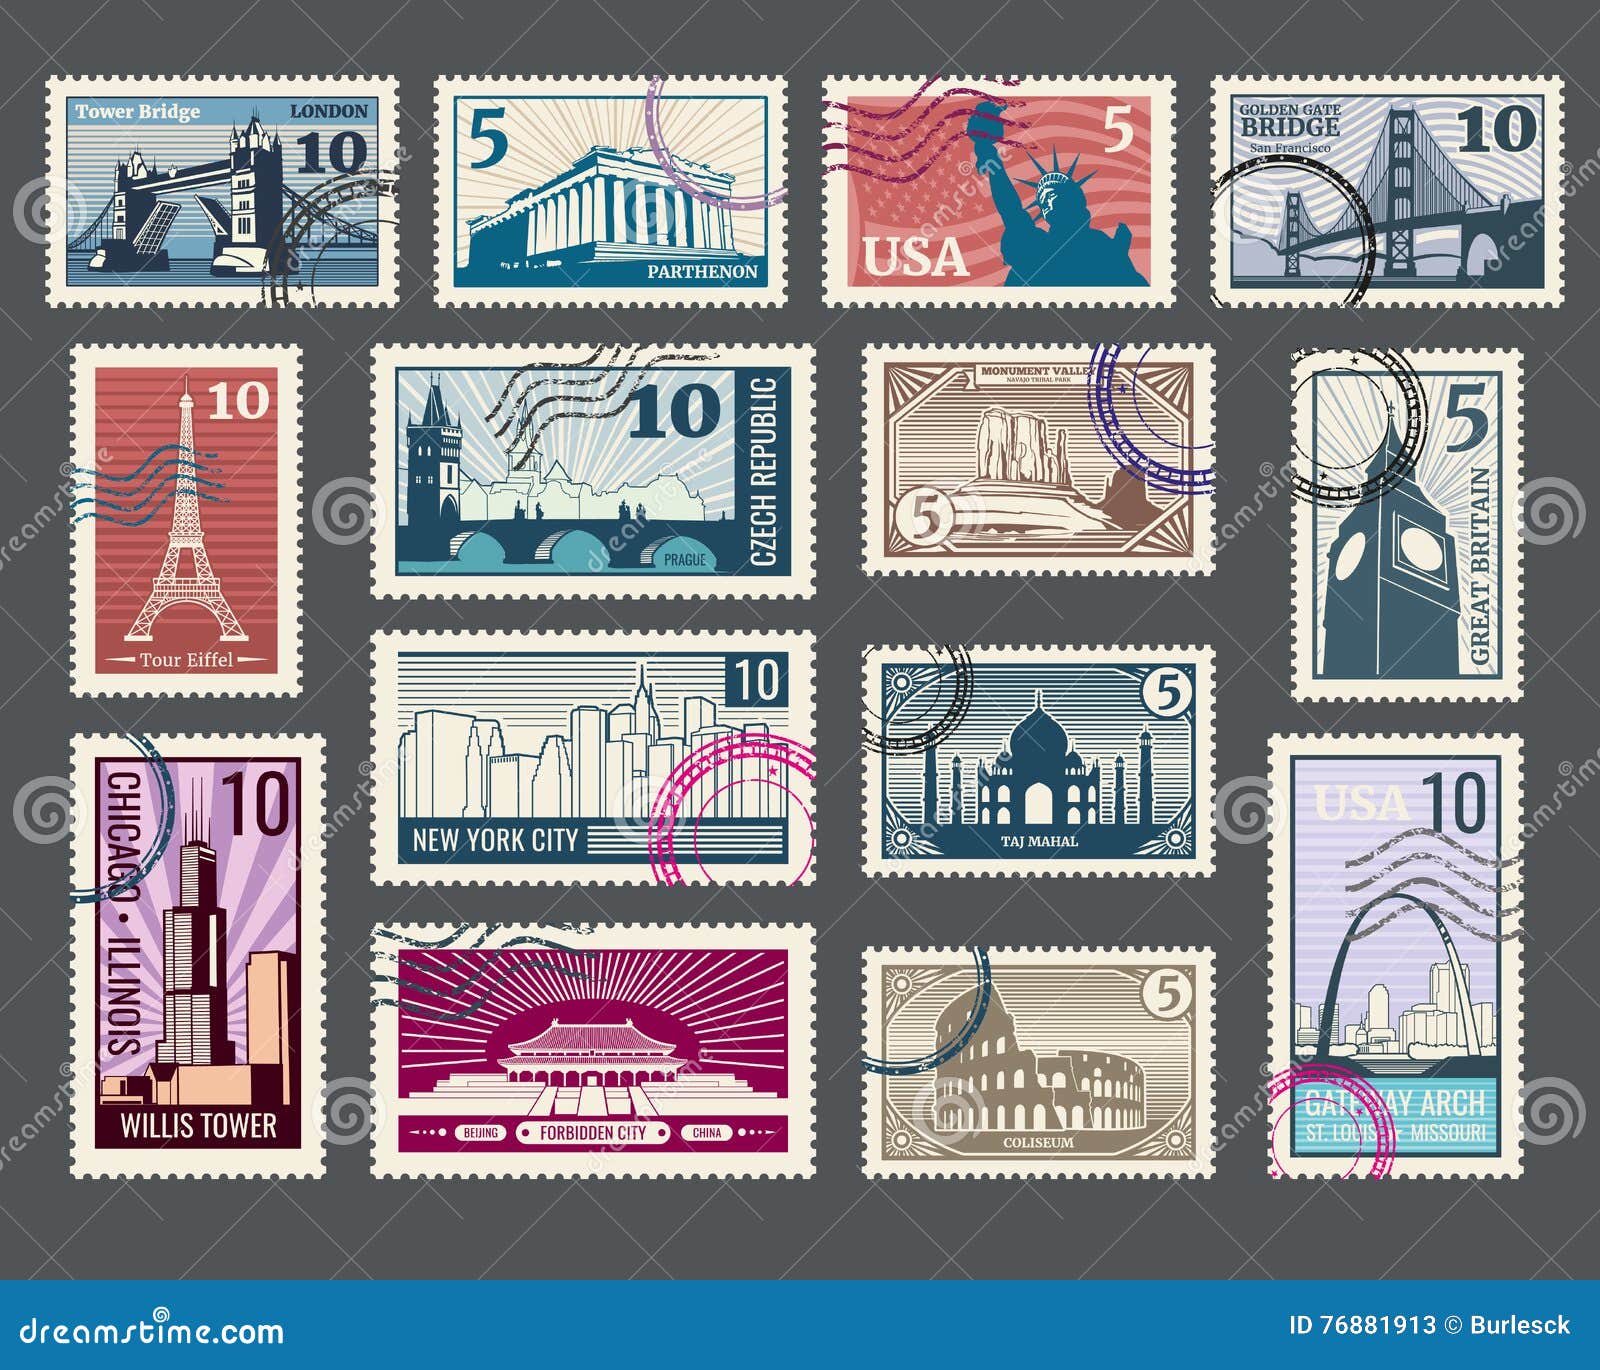 13 Diff ARCHITECTURE Famous Architects & Buildings Postage stamps Free  Shipping! Your #1 source with the best prices on Vintage stamps